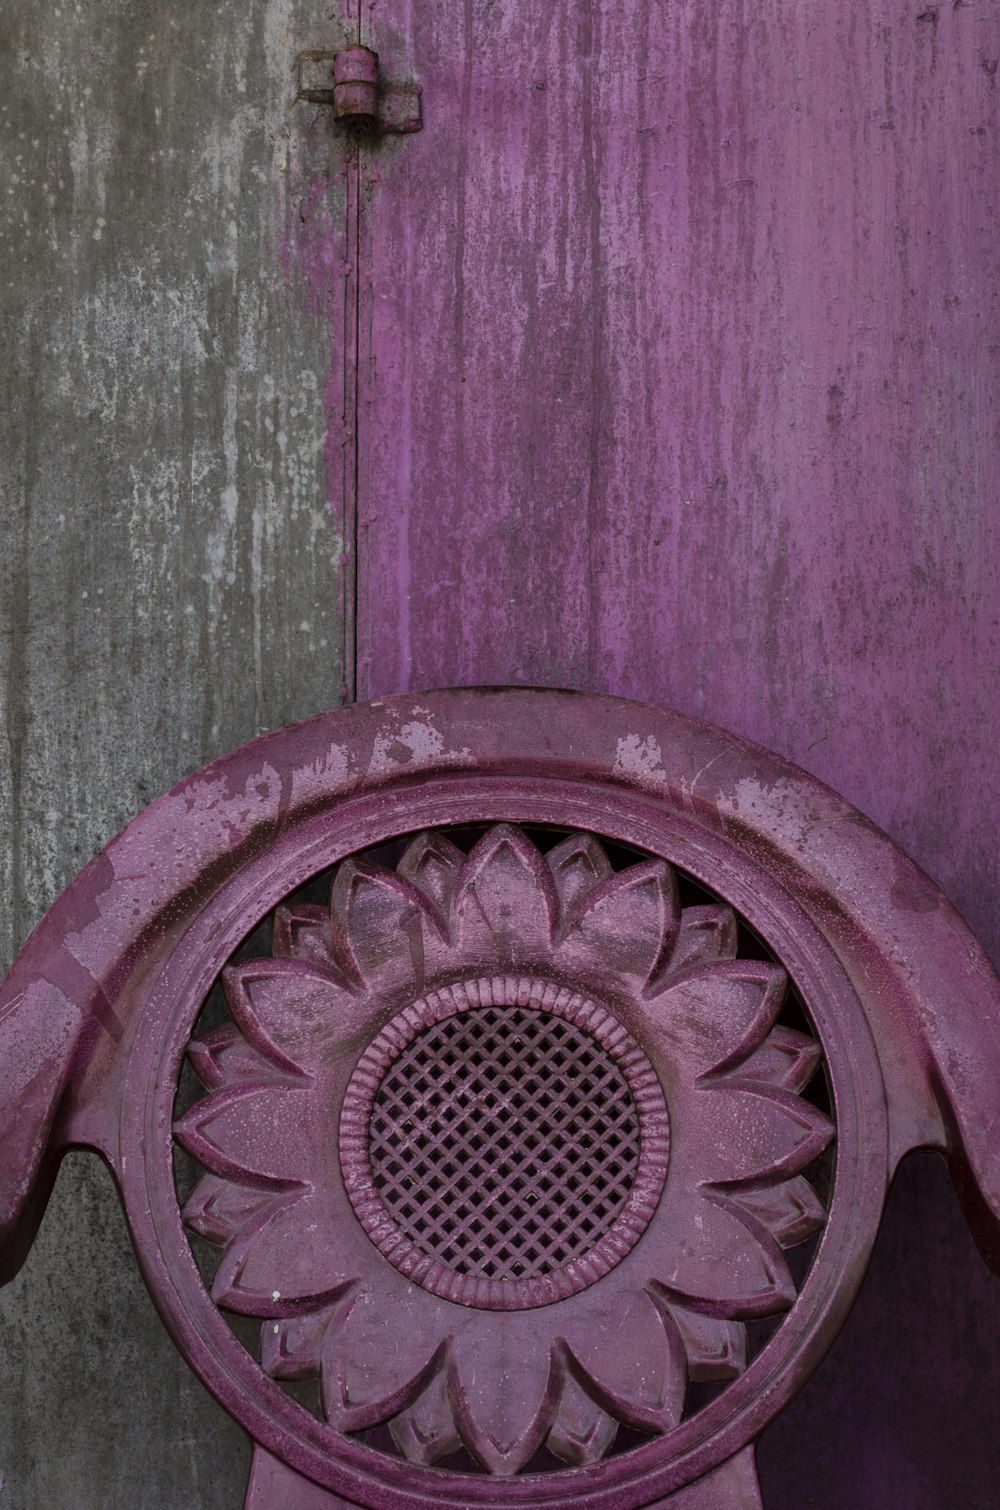 a purple chair sitting in front of a wooden door